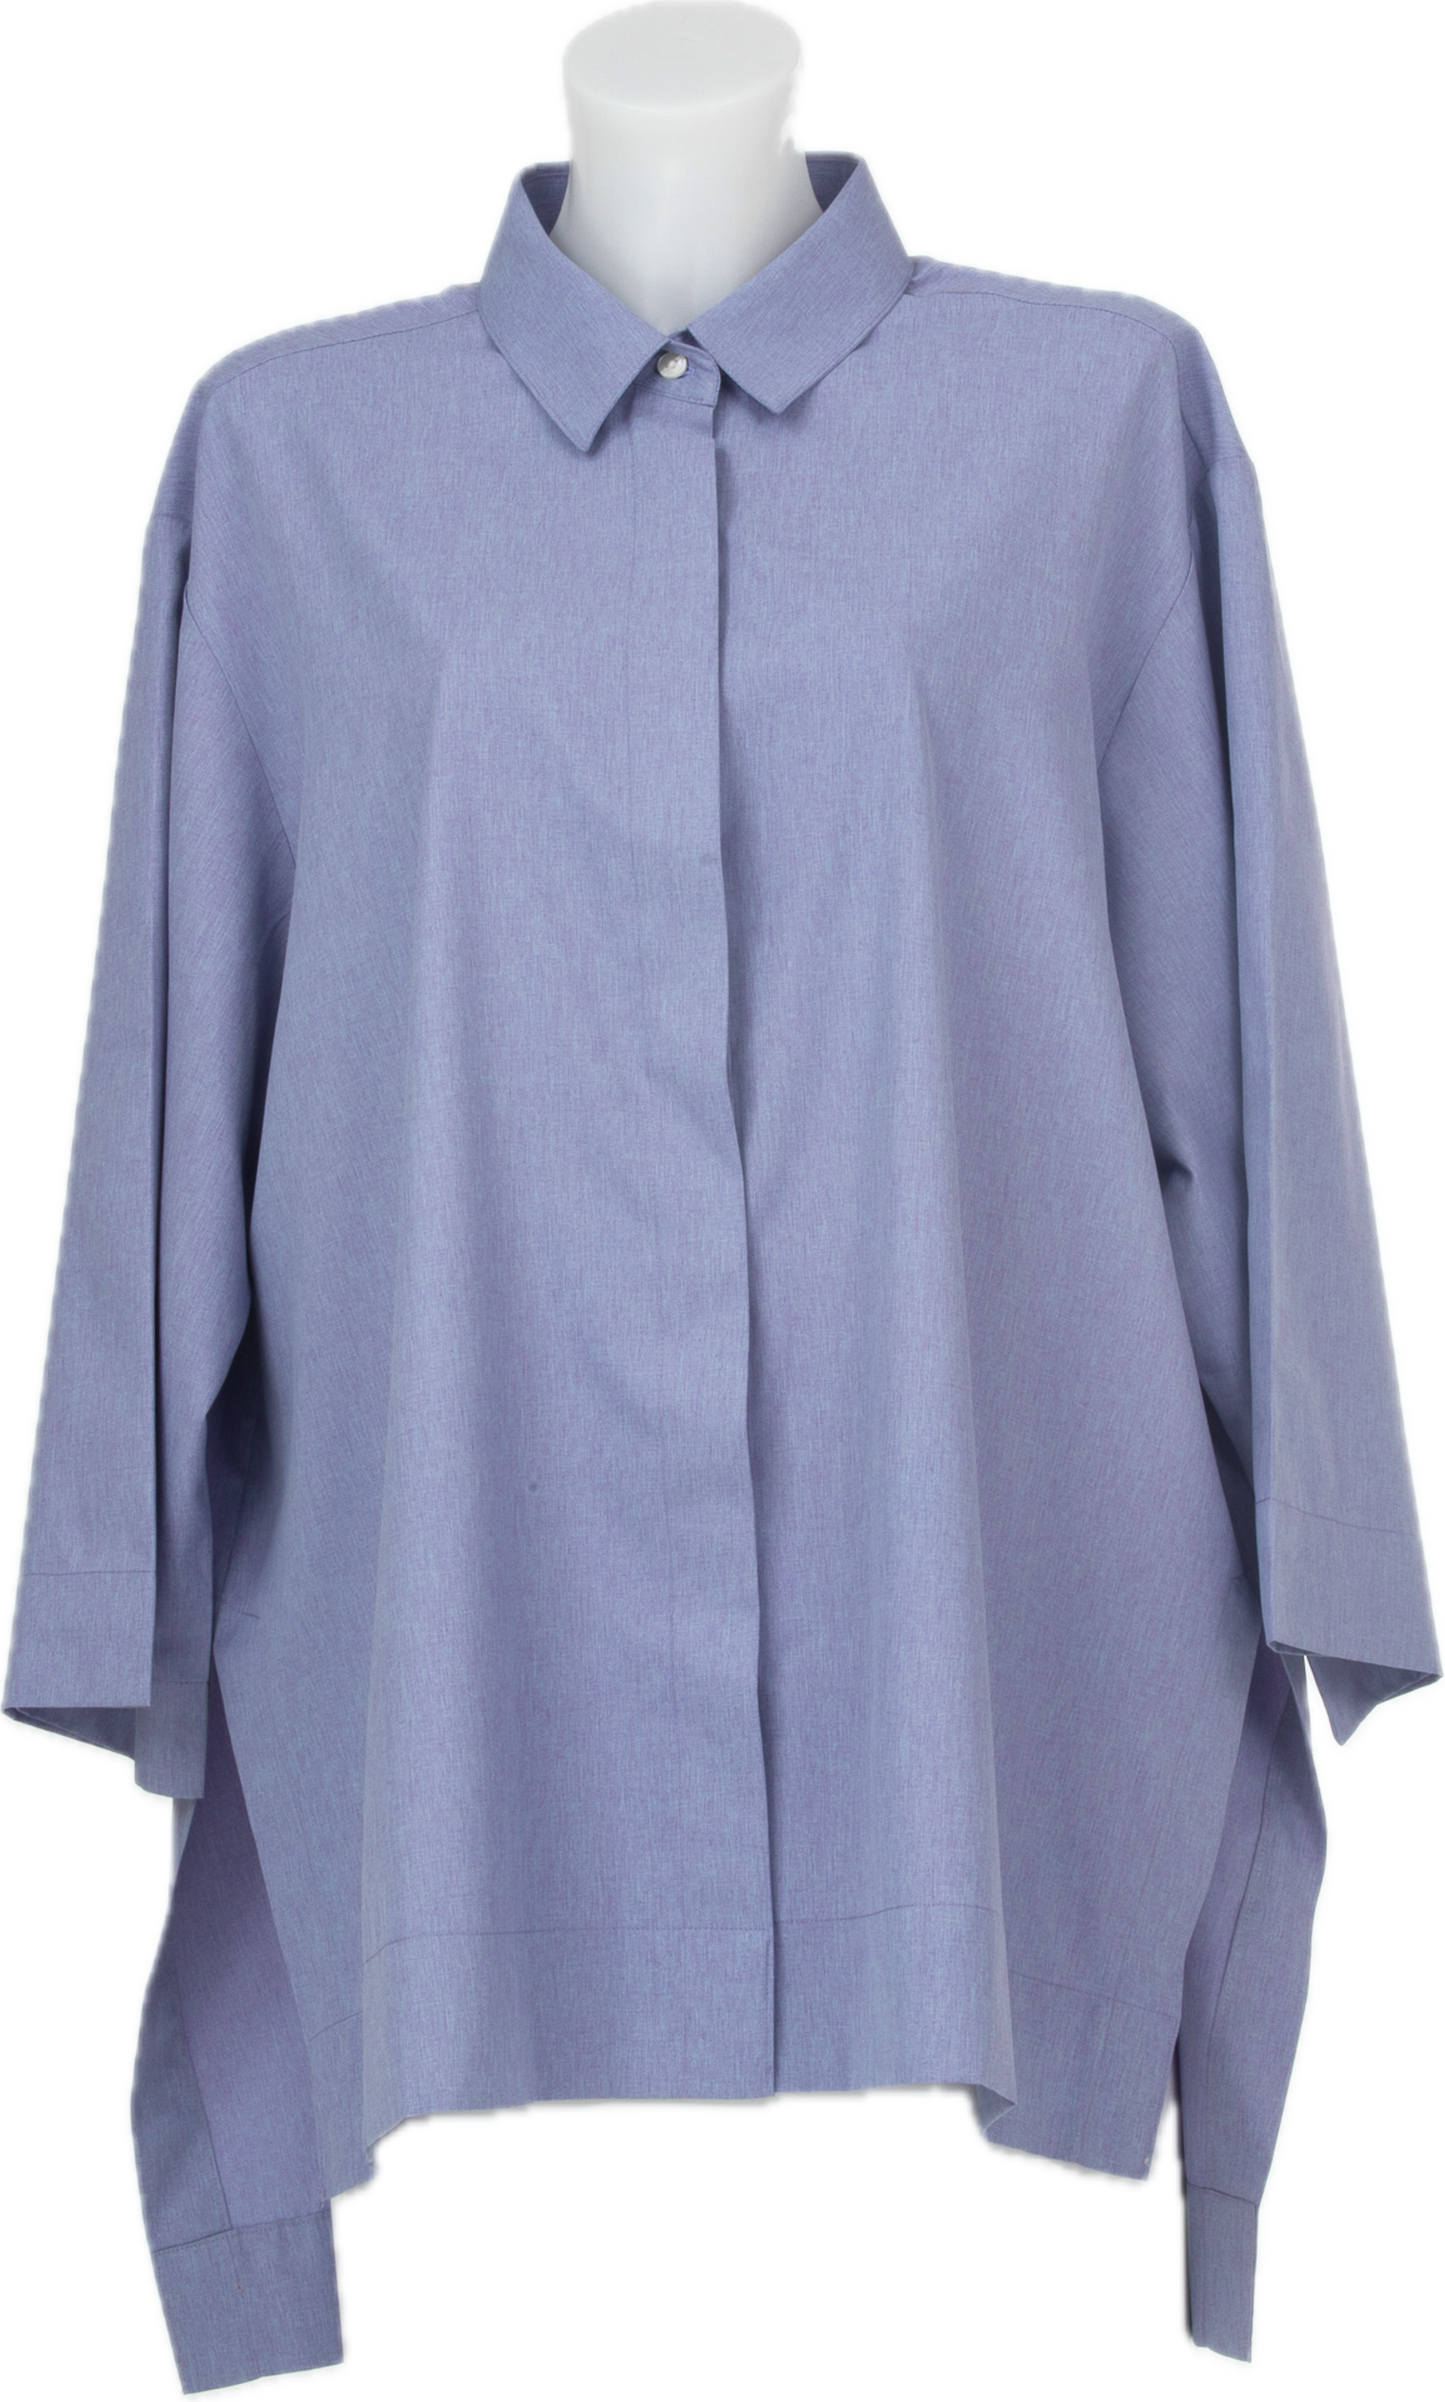 THE EDEN OVERSIZED SHIRT IN PERIWINKLE SOFT COTTON